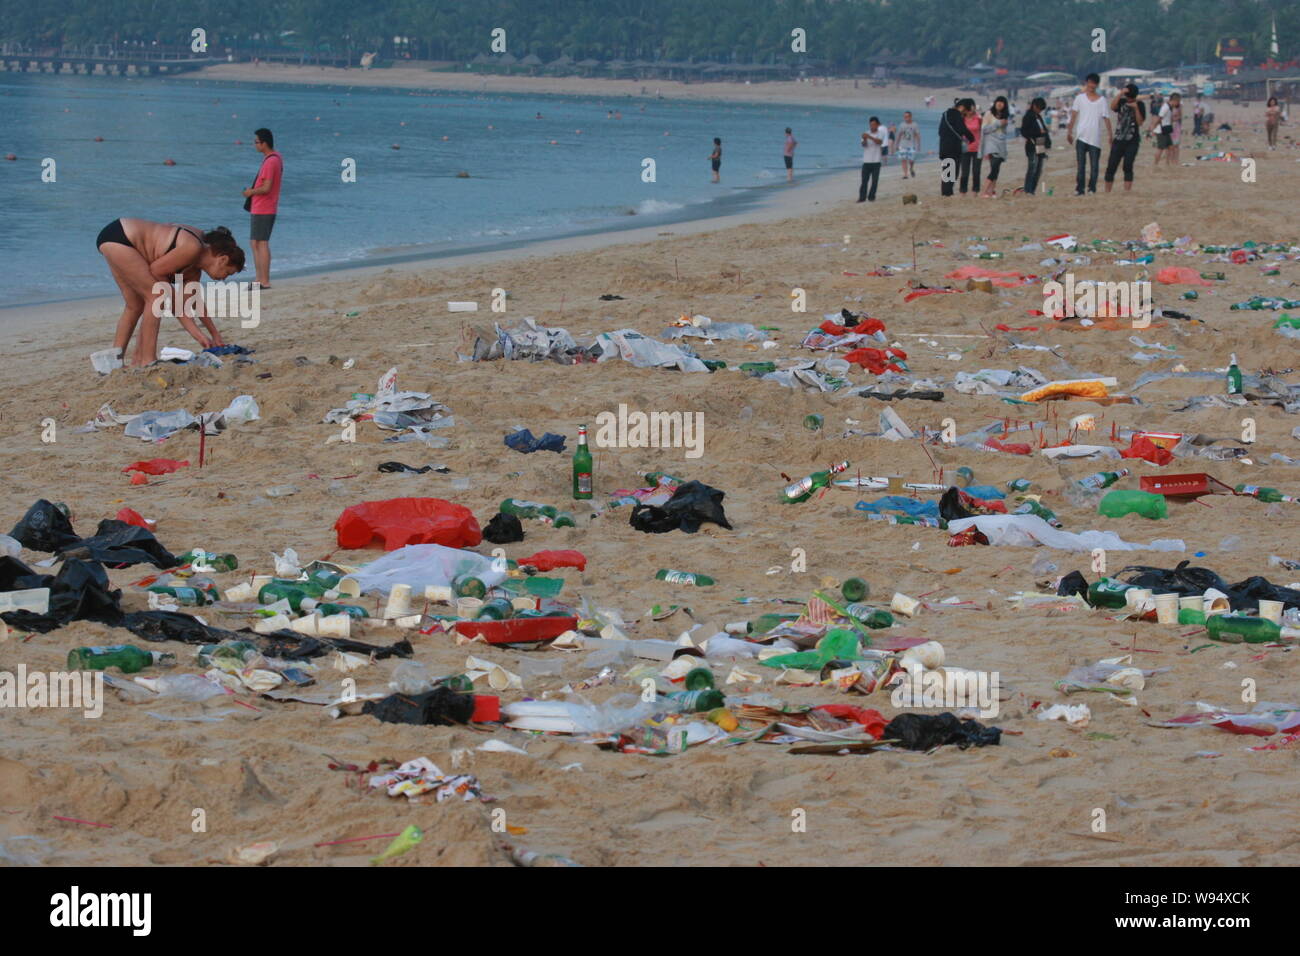 https://c8.alamy.com/comp/W94XCK/tourists-walk-on-a-beach-covered-with-garbage-left-by-others-at-the-east-china-sea-scenic-spot-in-sanya-city-south-chinas-hainan-province-1-october-W94XCK.jpg